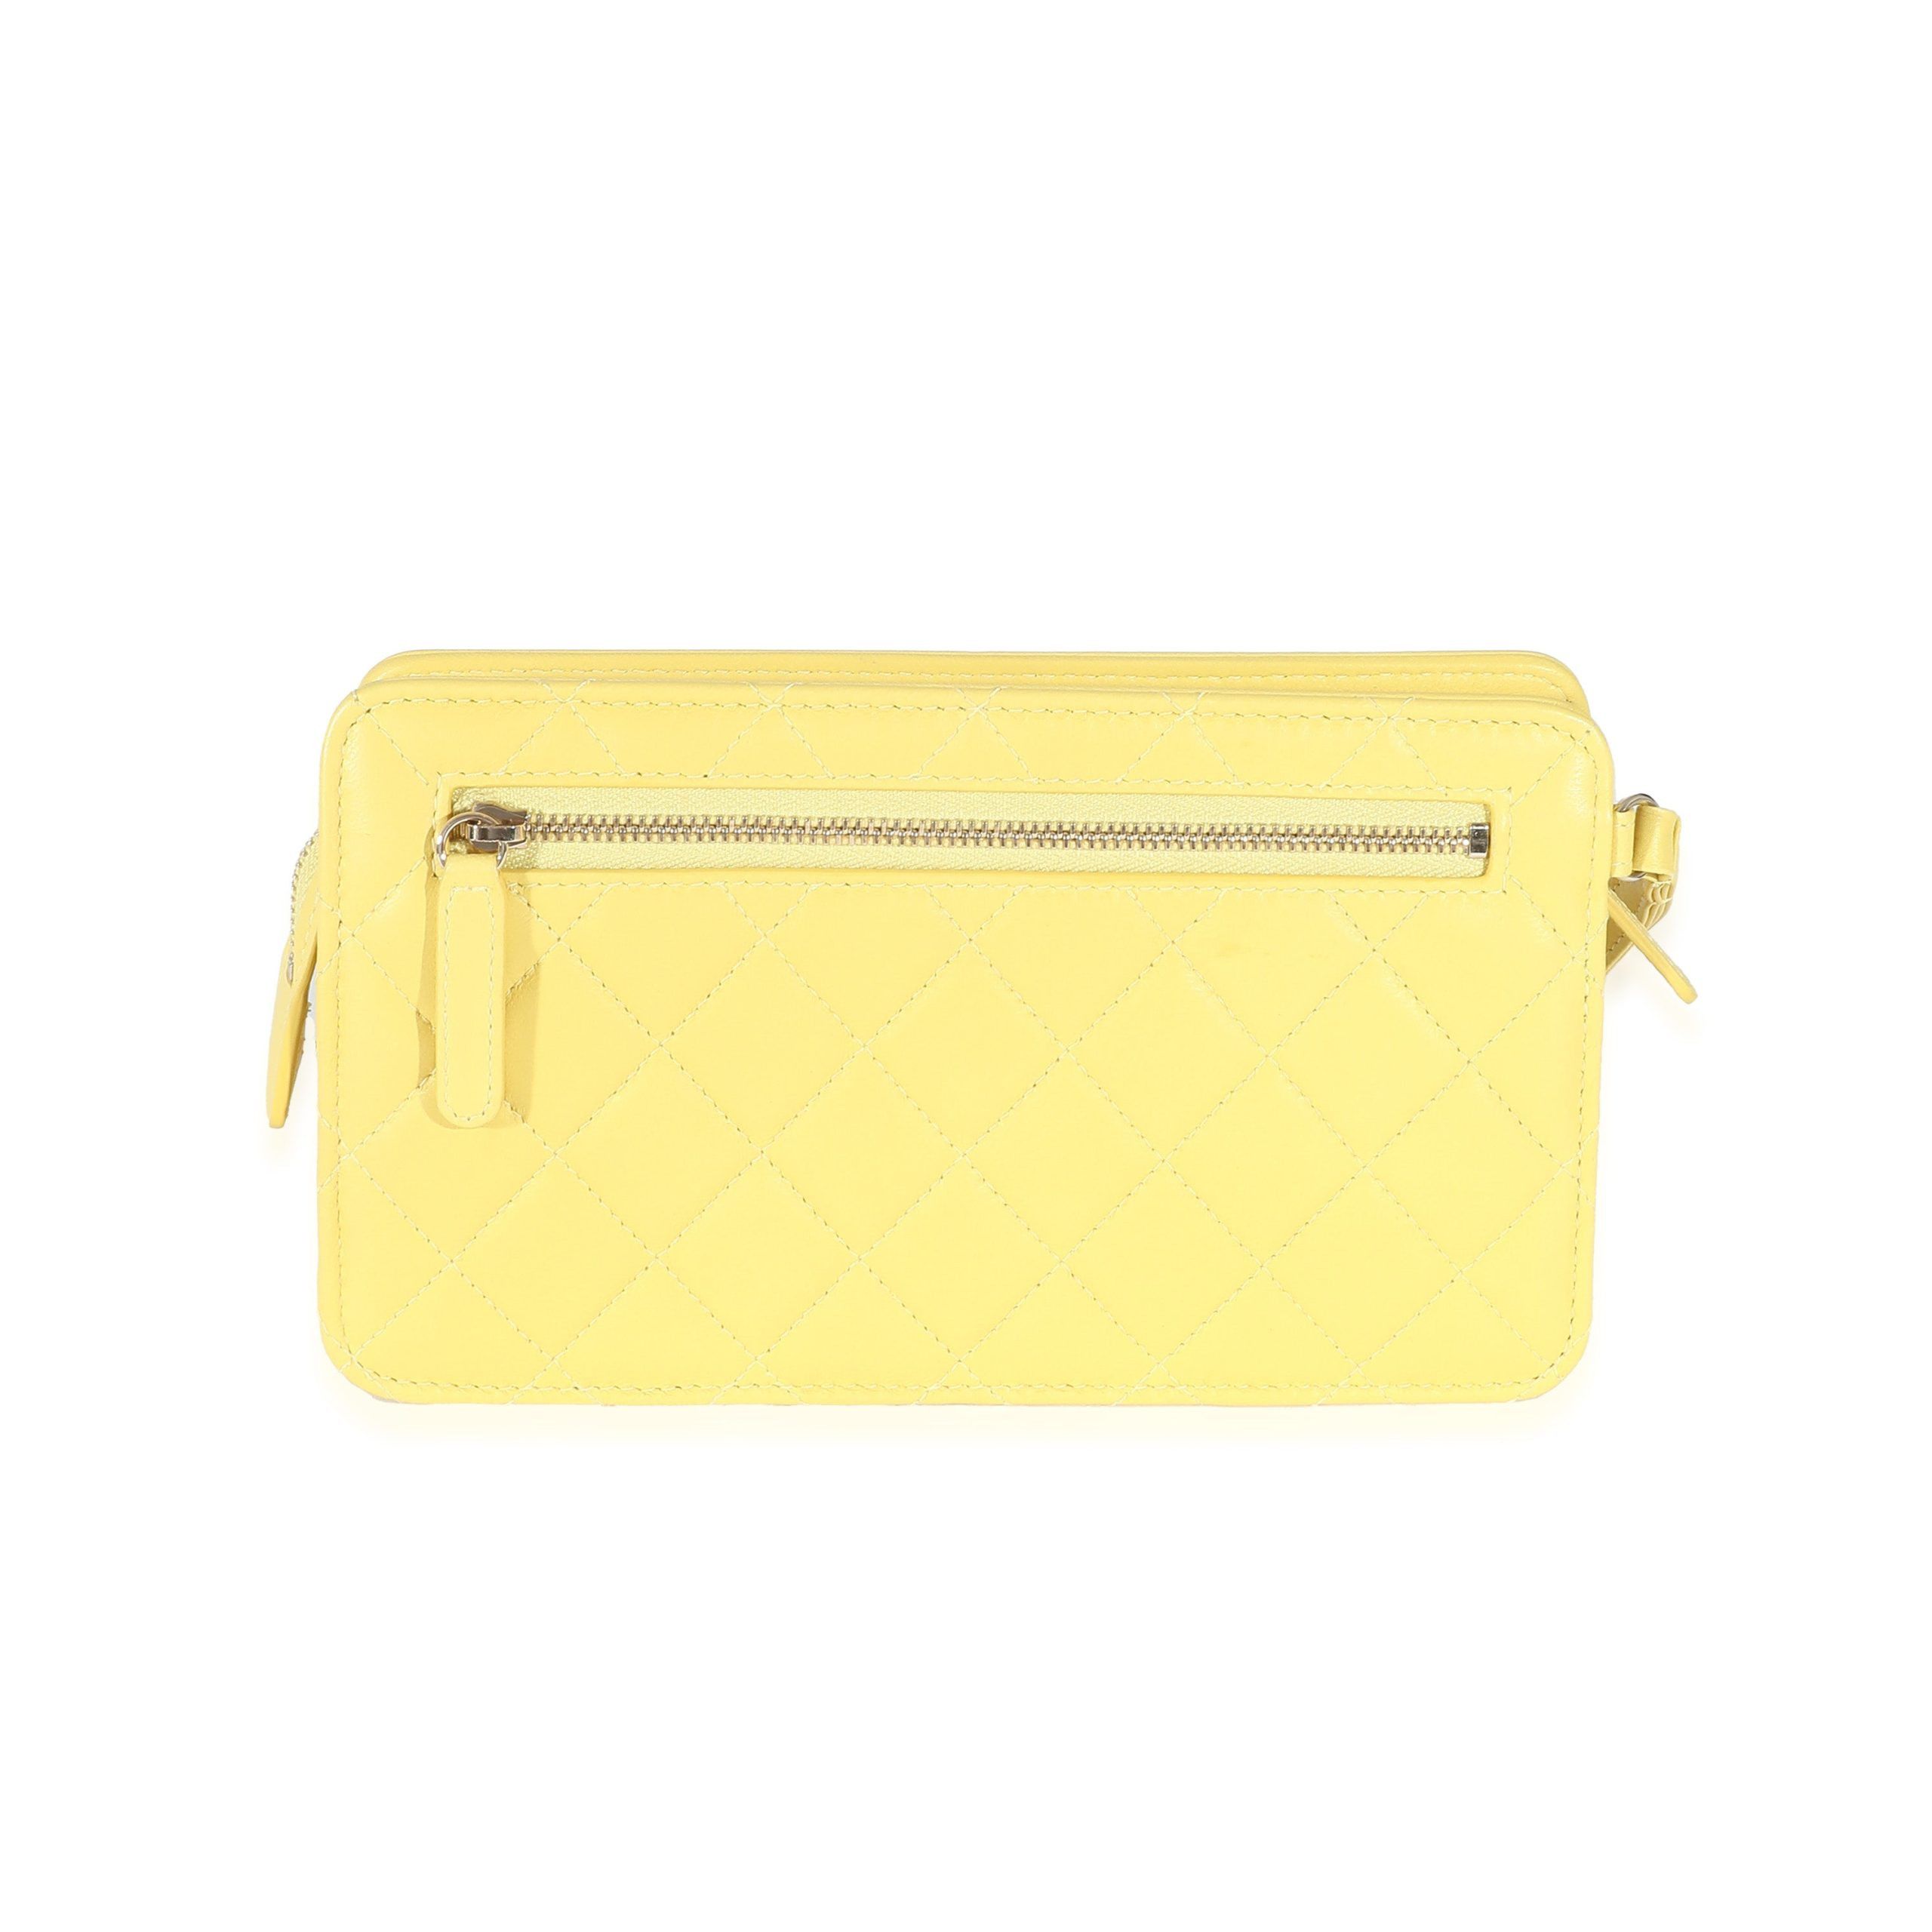 Chanel Chanel Yellow Lambskin Quilted Front Pocket Wristlet Size ONE SIZE - 4 Thumbnail